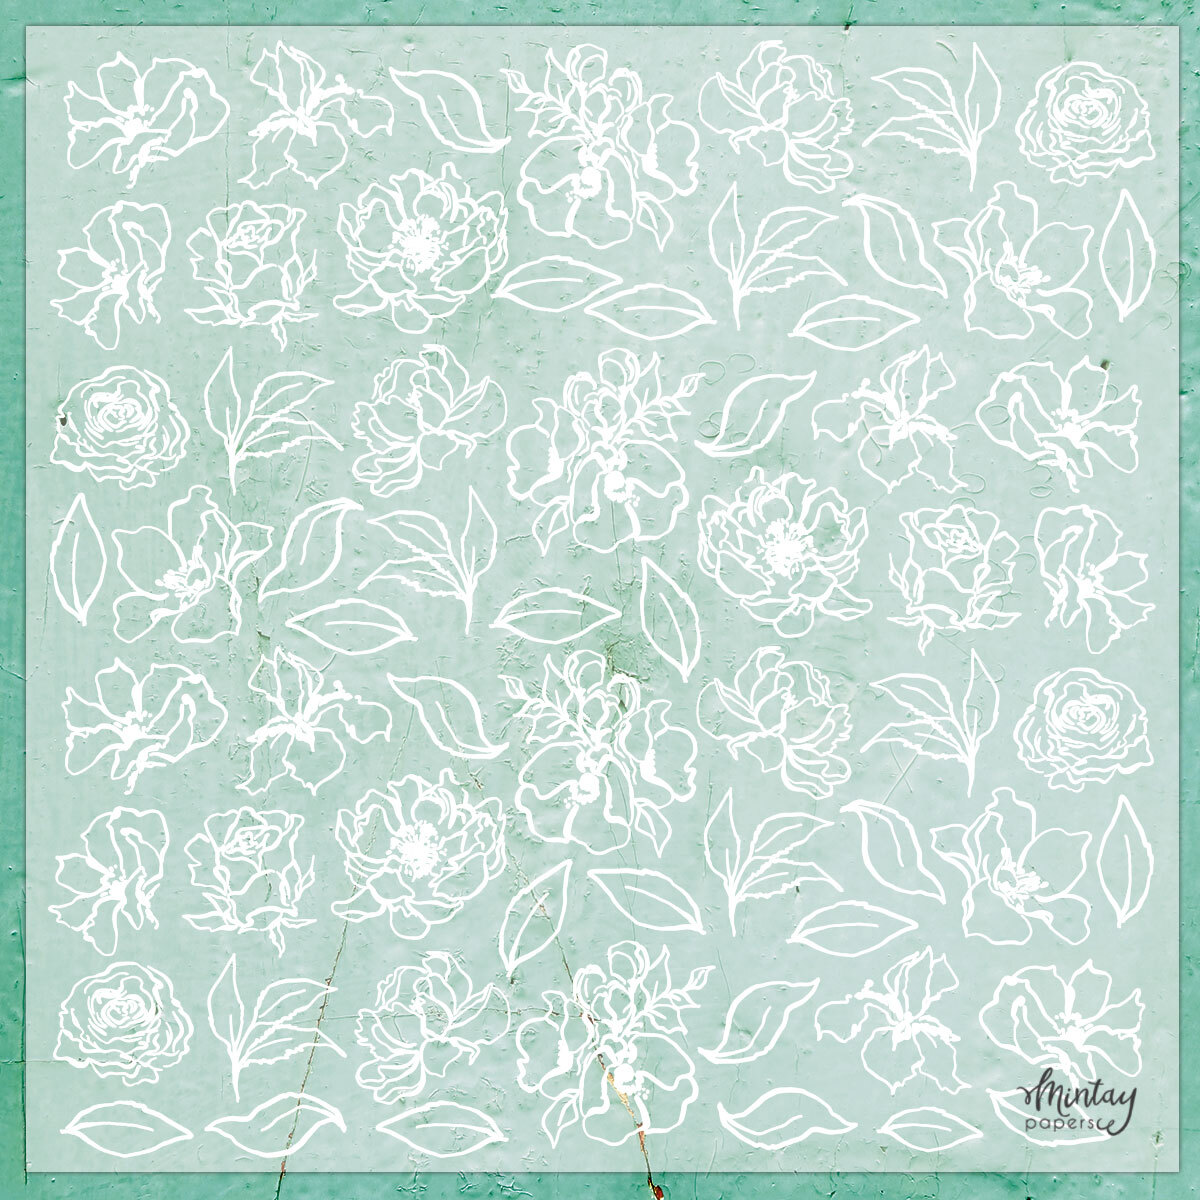 Mintay Papers 12x12 Decorative Vellum - Flowers